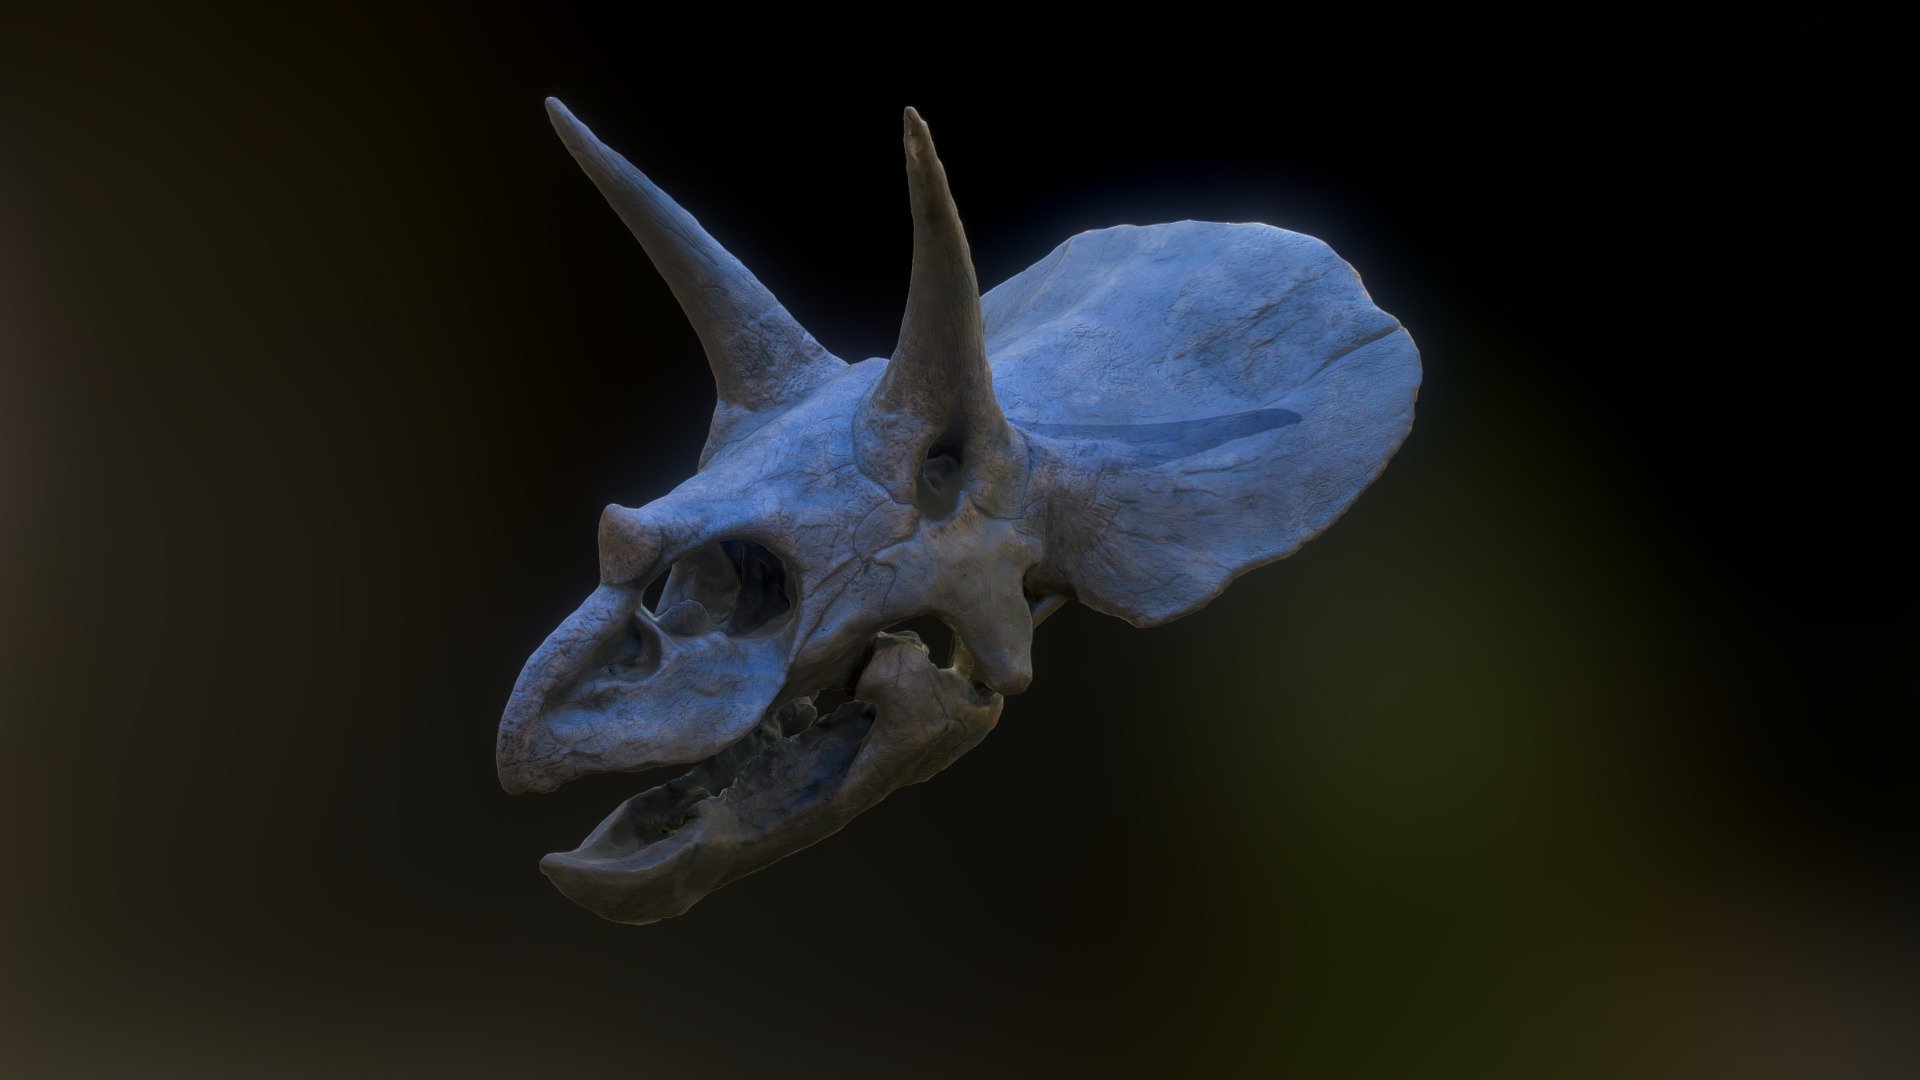 &ldquo;The name Triceratops means three-horned face, referring to the one small and two large horns on the skull, which can be seen on the cast on display in the Museum.

Triceratops was 7.3 metres long, and weighed more than 6 tonnes. It was a herbivore, and its jaws were equipped with a constantly replaced battery of teeth specially adapted for cutting up tough plant material.
The horn and frill of Triceratops have attracted much speculation, but it is likely that they were used for display and fighting to maintain social dominance, and to defend territory and mates. Functional analysis suggests that Triceratops locked horns in pushing and twisting fights between individuals, the massive frill at the back of the skull acting as a shield to deflect the horns of opponents and protect the vulnerable neck and shoulder muscles.